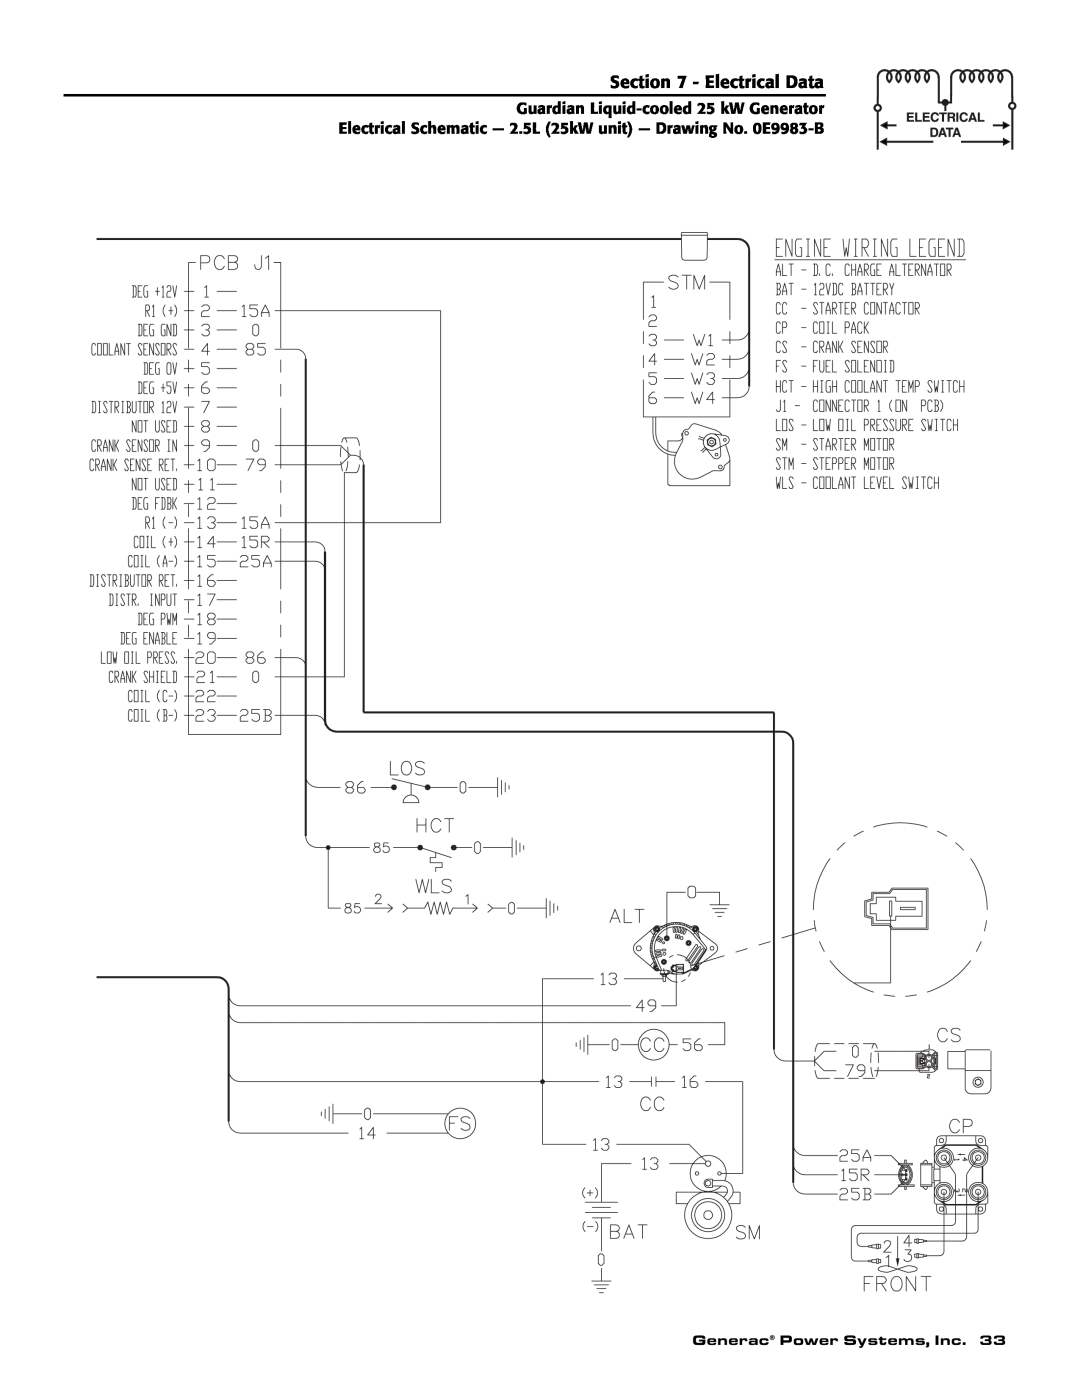 Generac Power Systems 005040-0, 005040-1, 005053-0, 005053-1, 005054-0, 005054-1 owner manual Electrical Data 